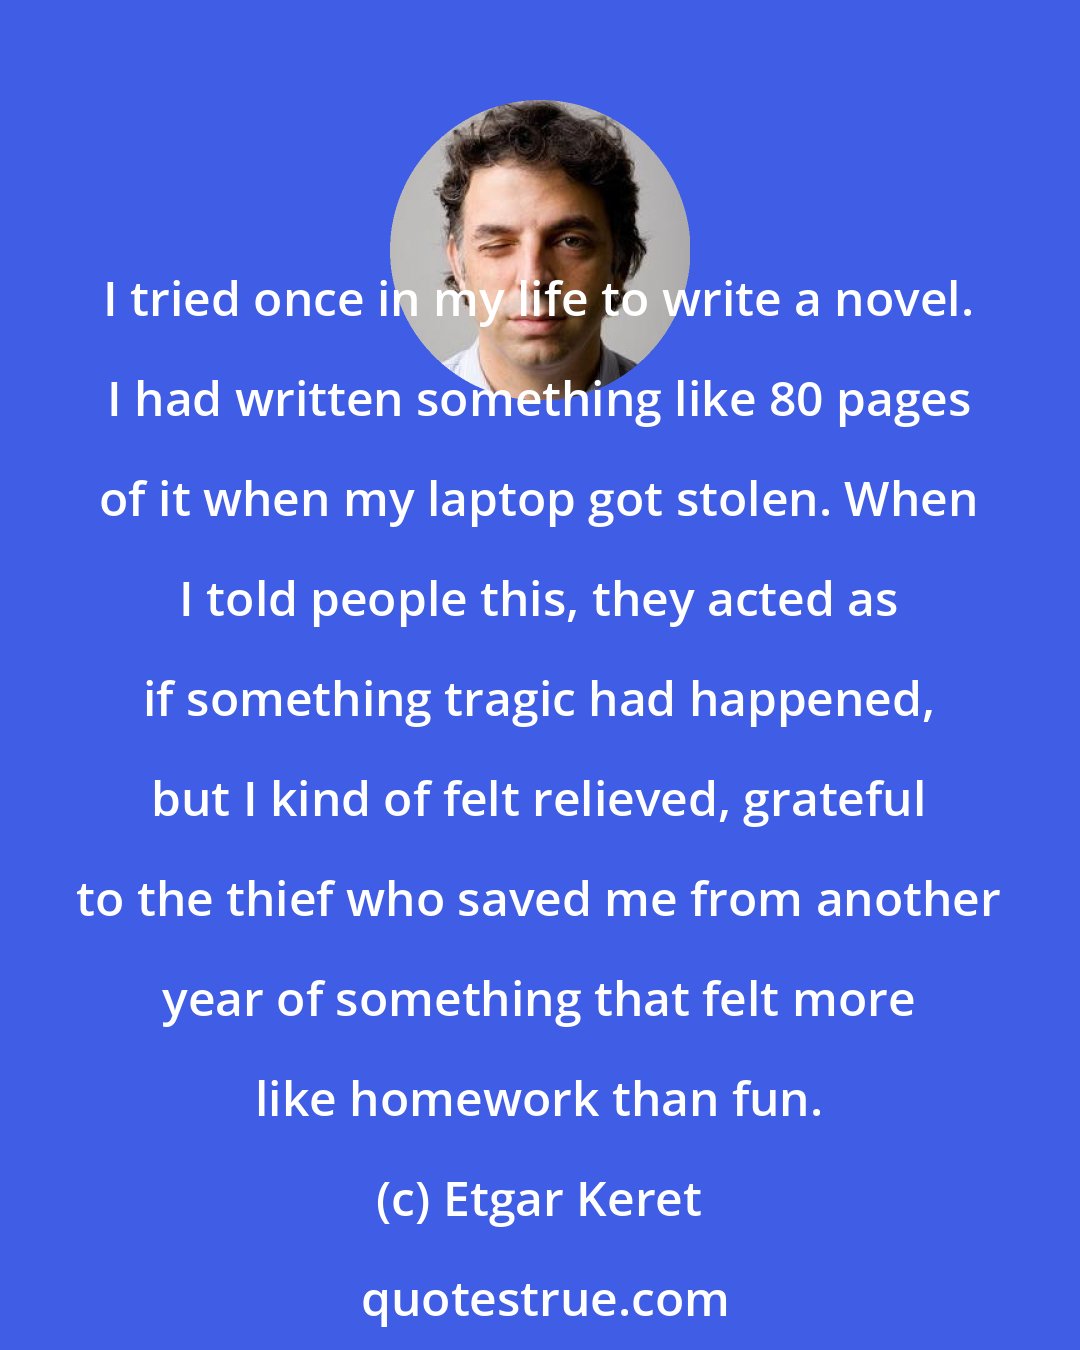 Etgar Keret: I tried once in my life to write a novel. I had written something like 80 pages of it when my laptop got stolen. When I told people this, they acted as if something tragic had happened, but I kind of felt relieved, grateful to the thief who saved me from another year of something that felt more like homework than fun.